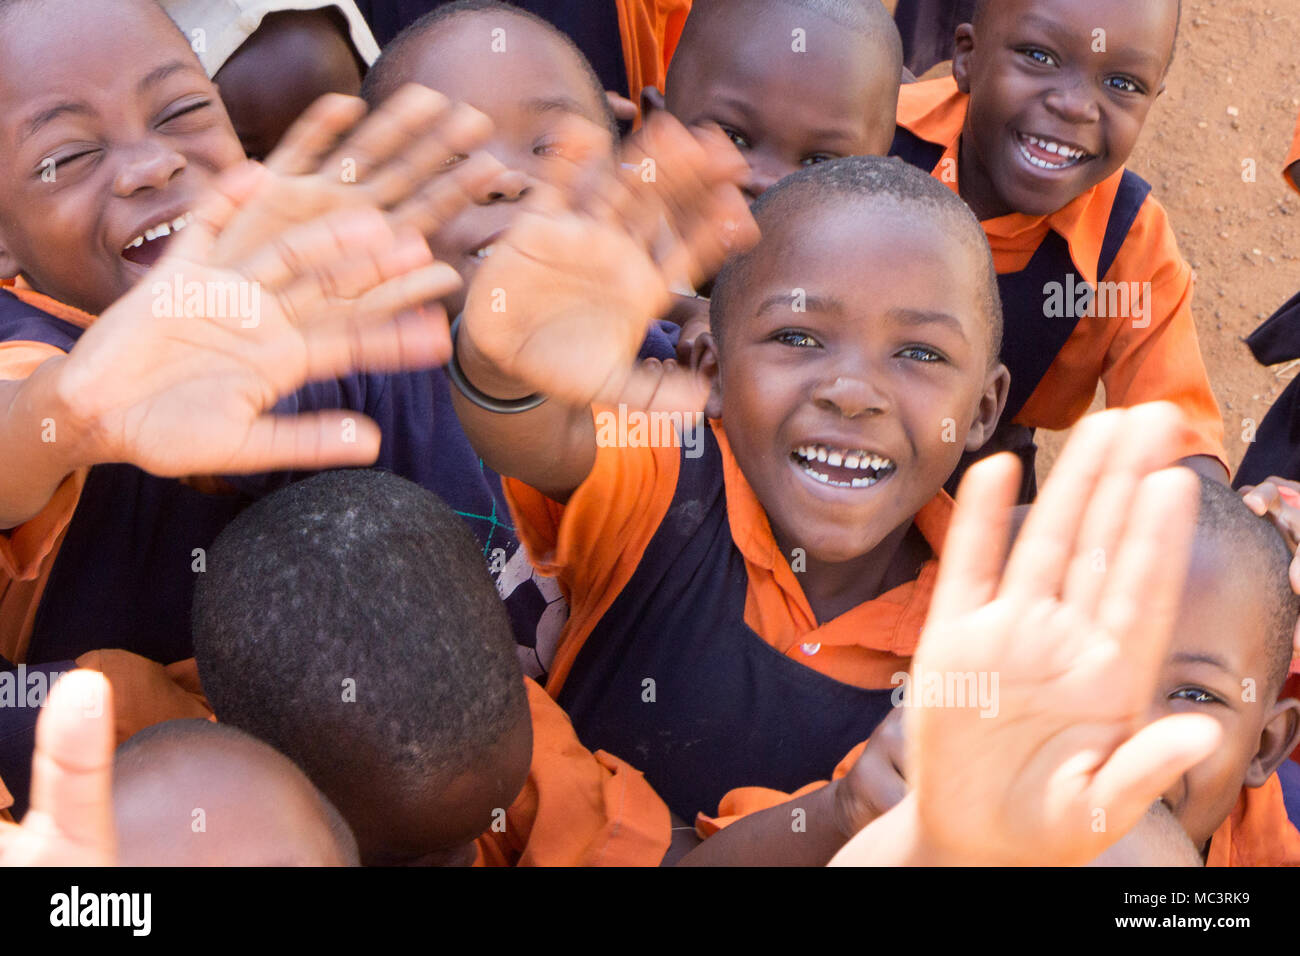 Uganda. June 13 2017. A group of happy primary-school children smiling, laughing and waving at a primary school. Stock Photo